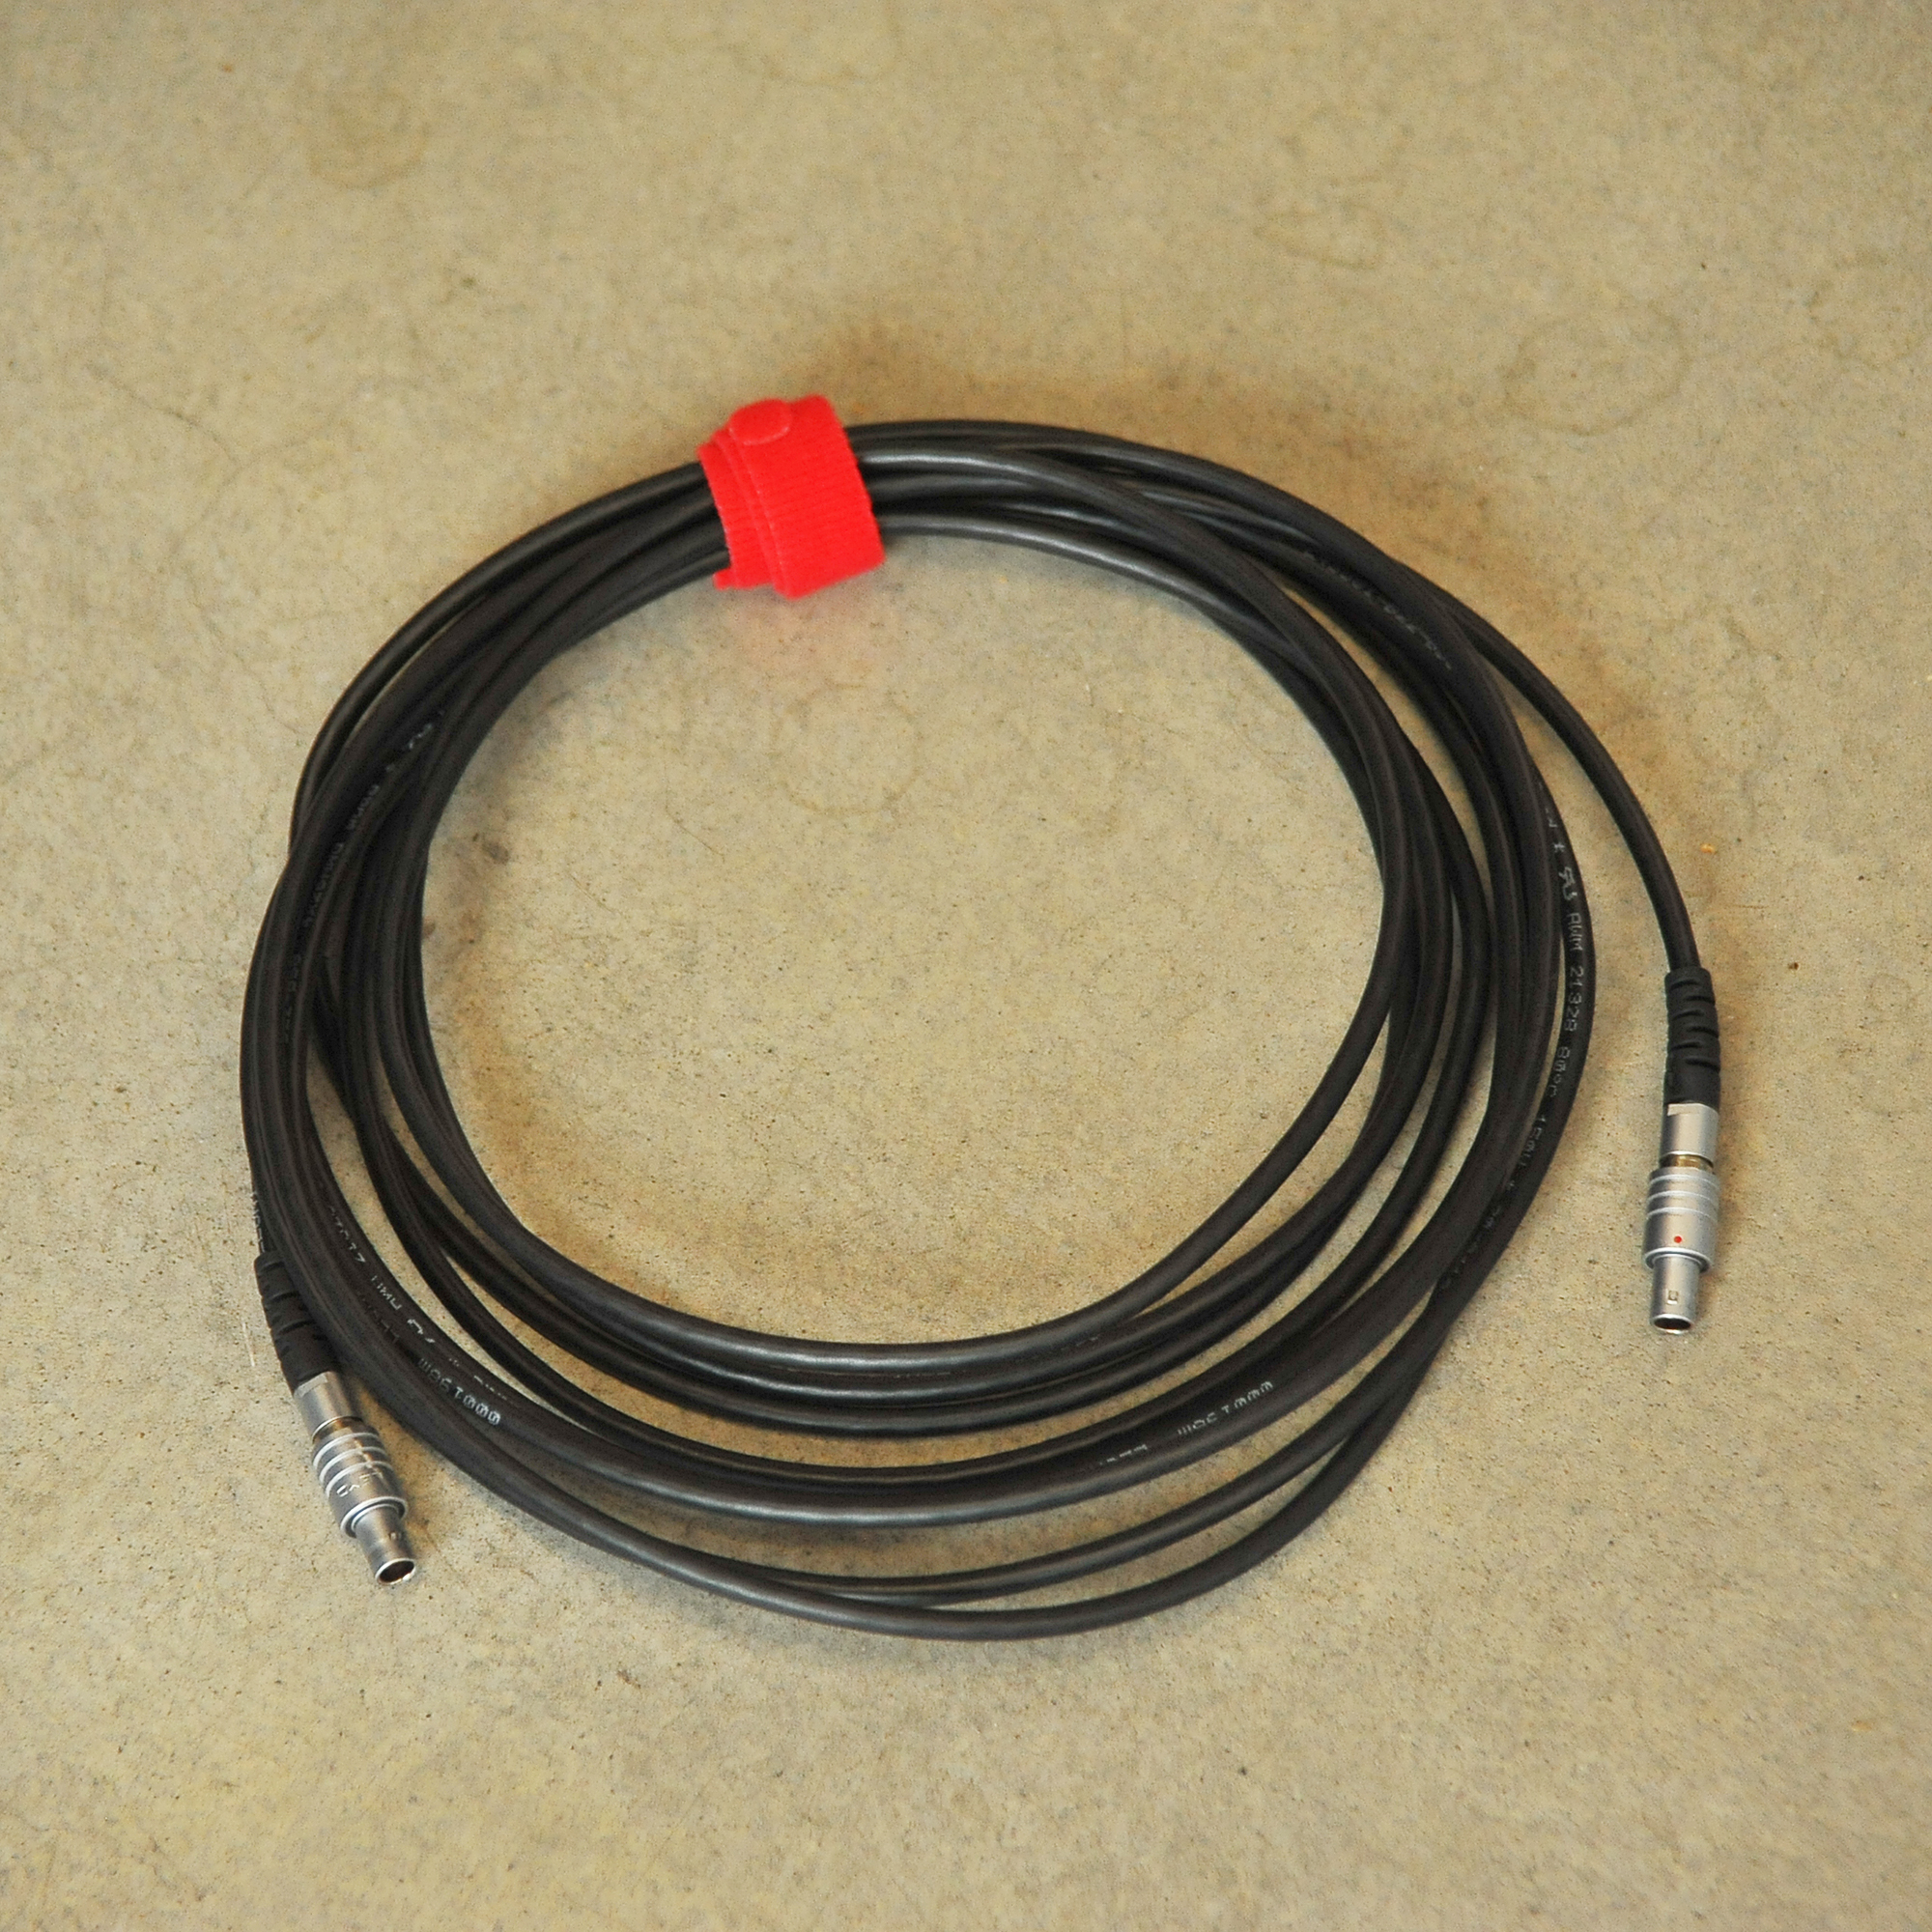 ARRI Cable for Control Panel (5m) (B-STOCK)